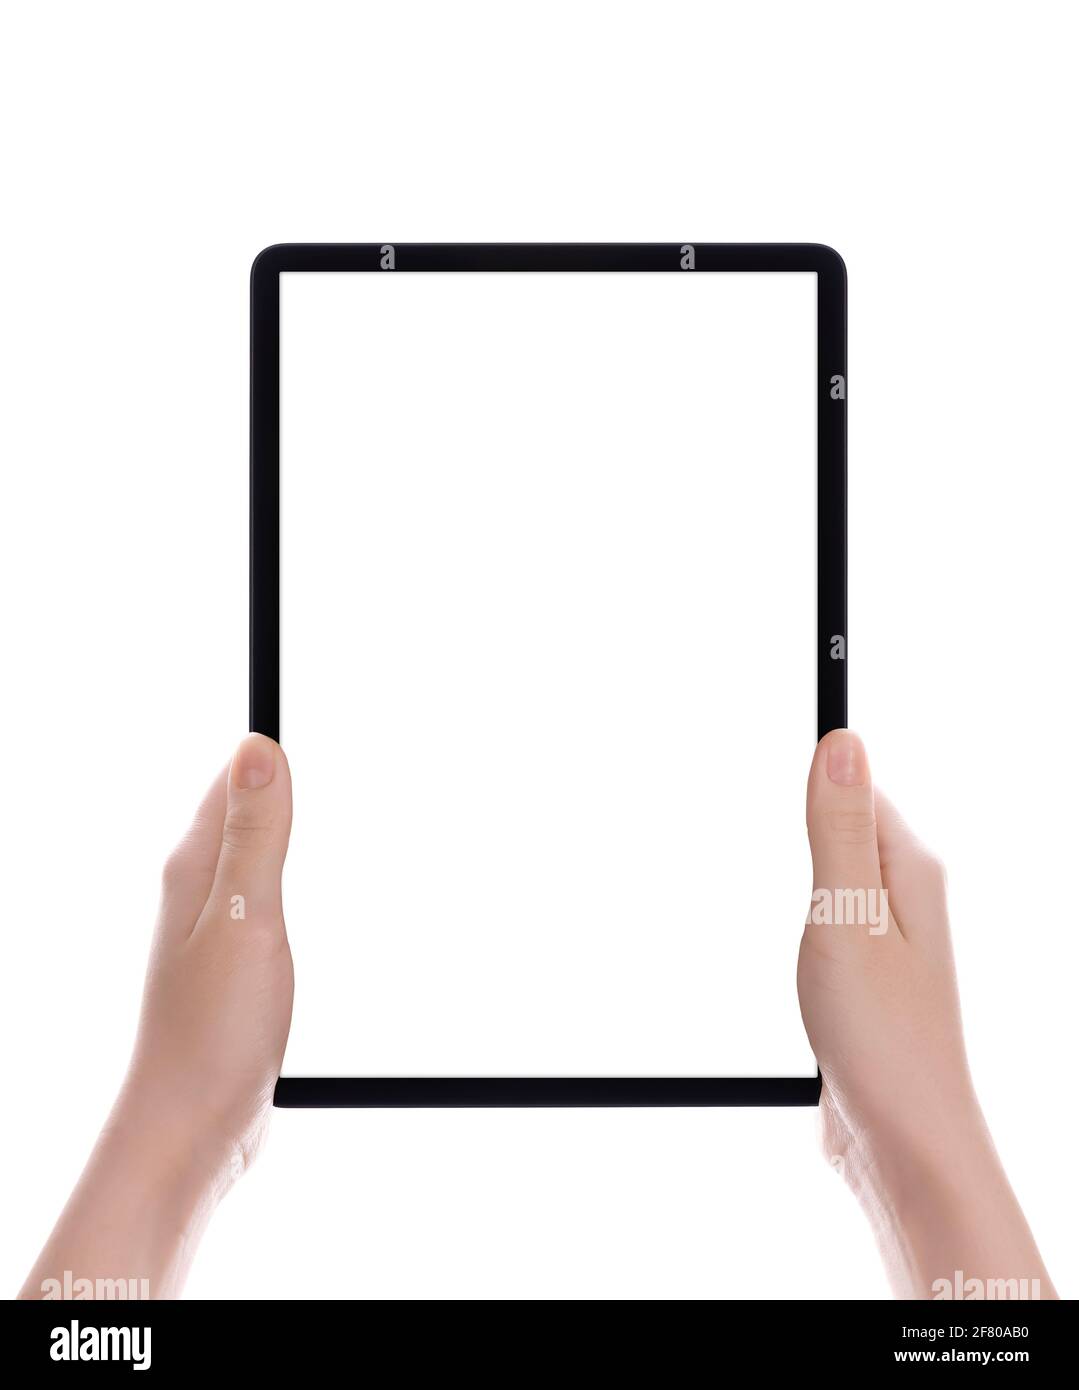 Hands holding a tablet computer with white screen. Woman hands showing empty screen of modern digital tablet. Hand holding tablet pc isolated on white Stock Photo